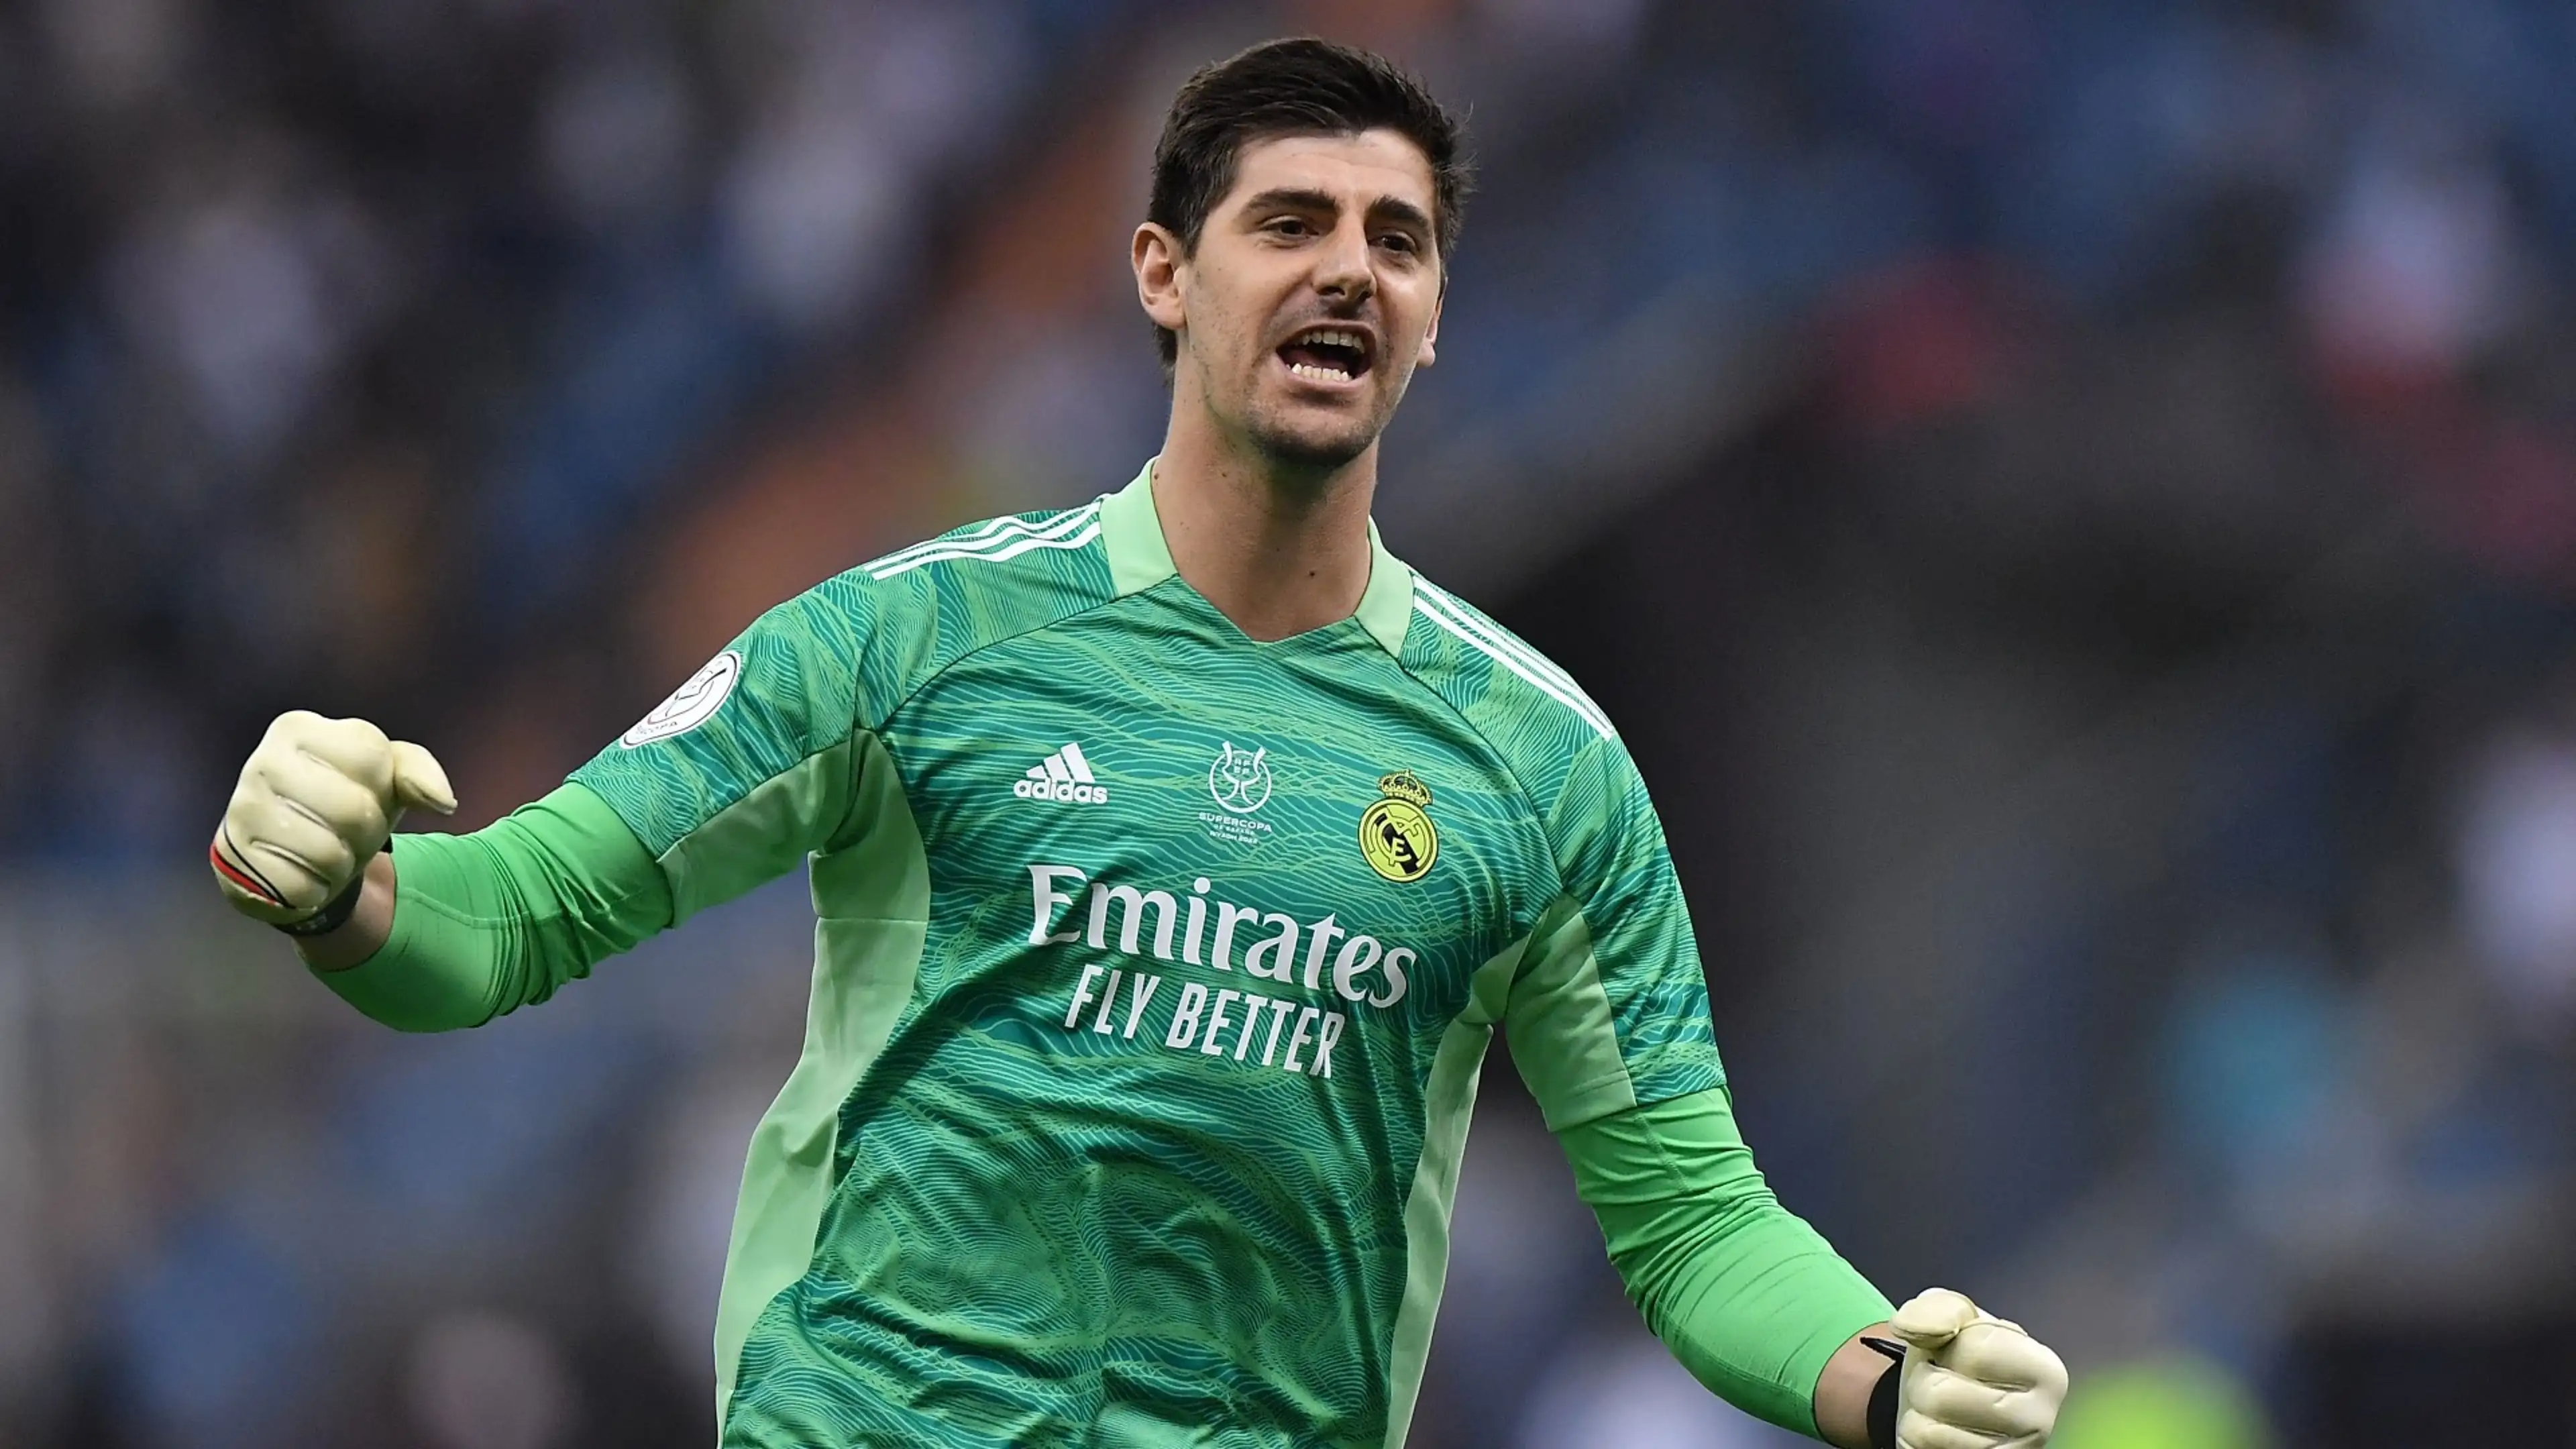 De Gea, Navas Or Kepa May Replace Injured Courtois At Real Madrid